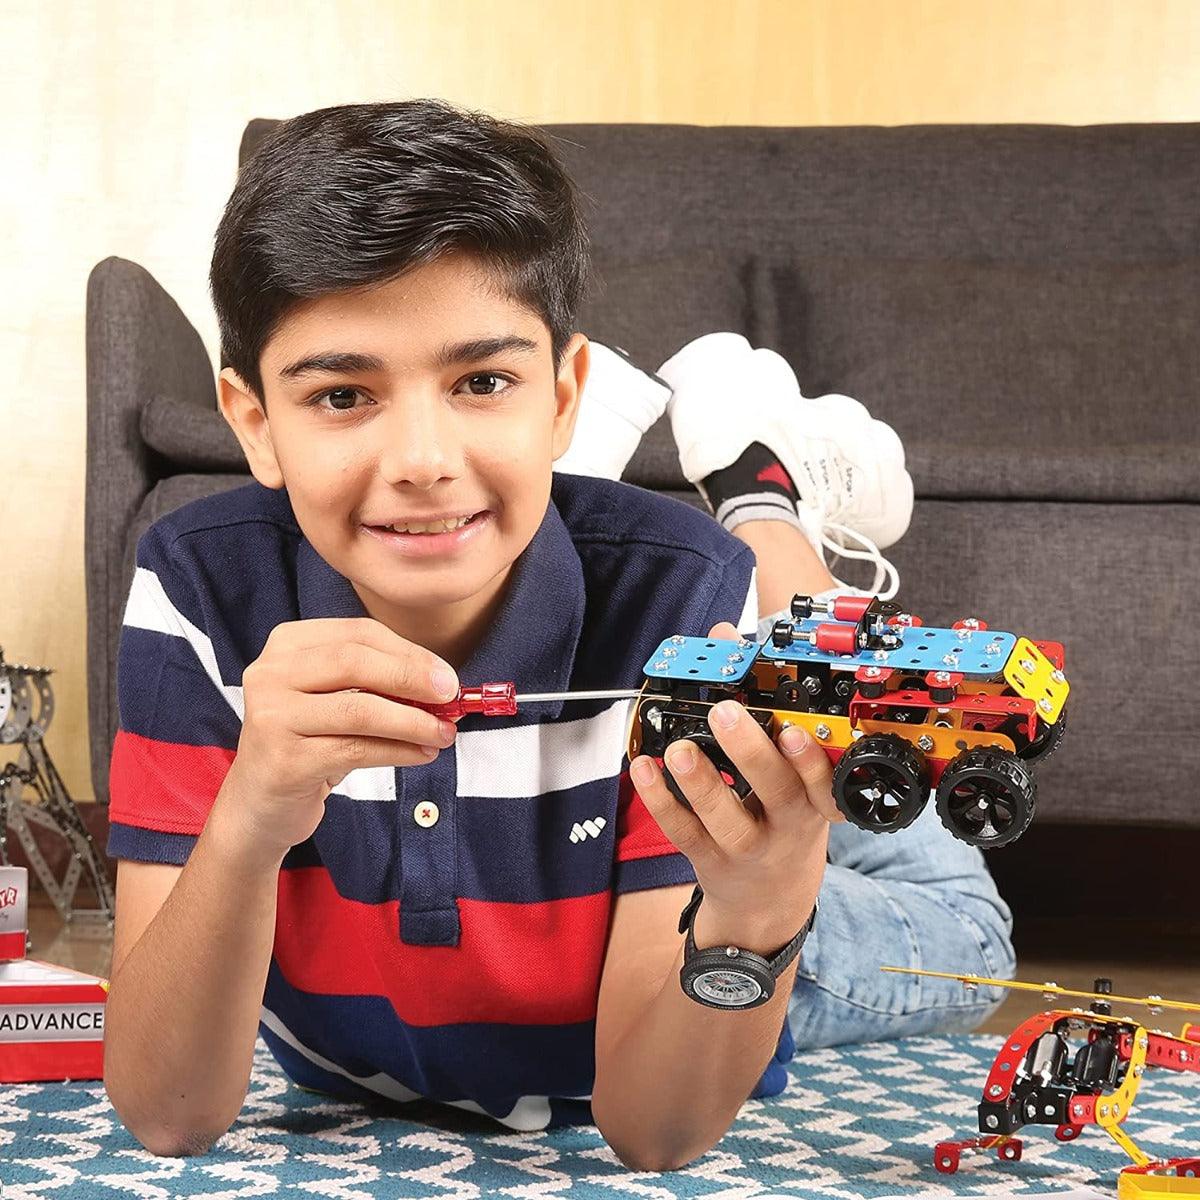 Zephyr Mechanix - Advance Set DIY Mechanical STEM Toy for Ages 7-15 Years